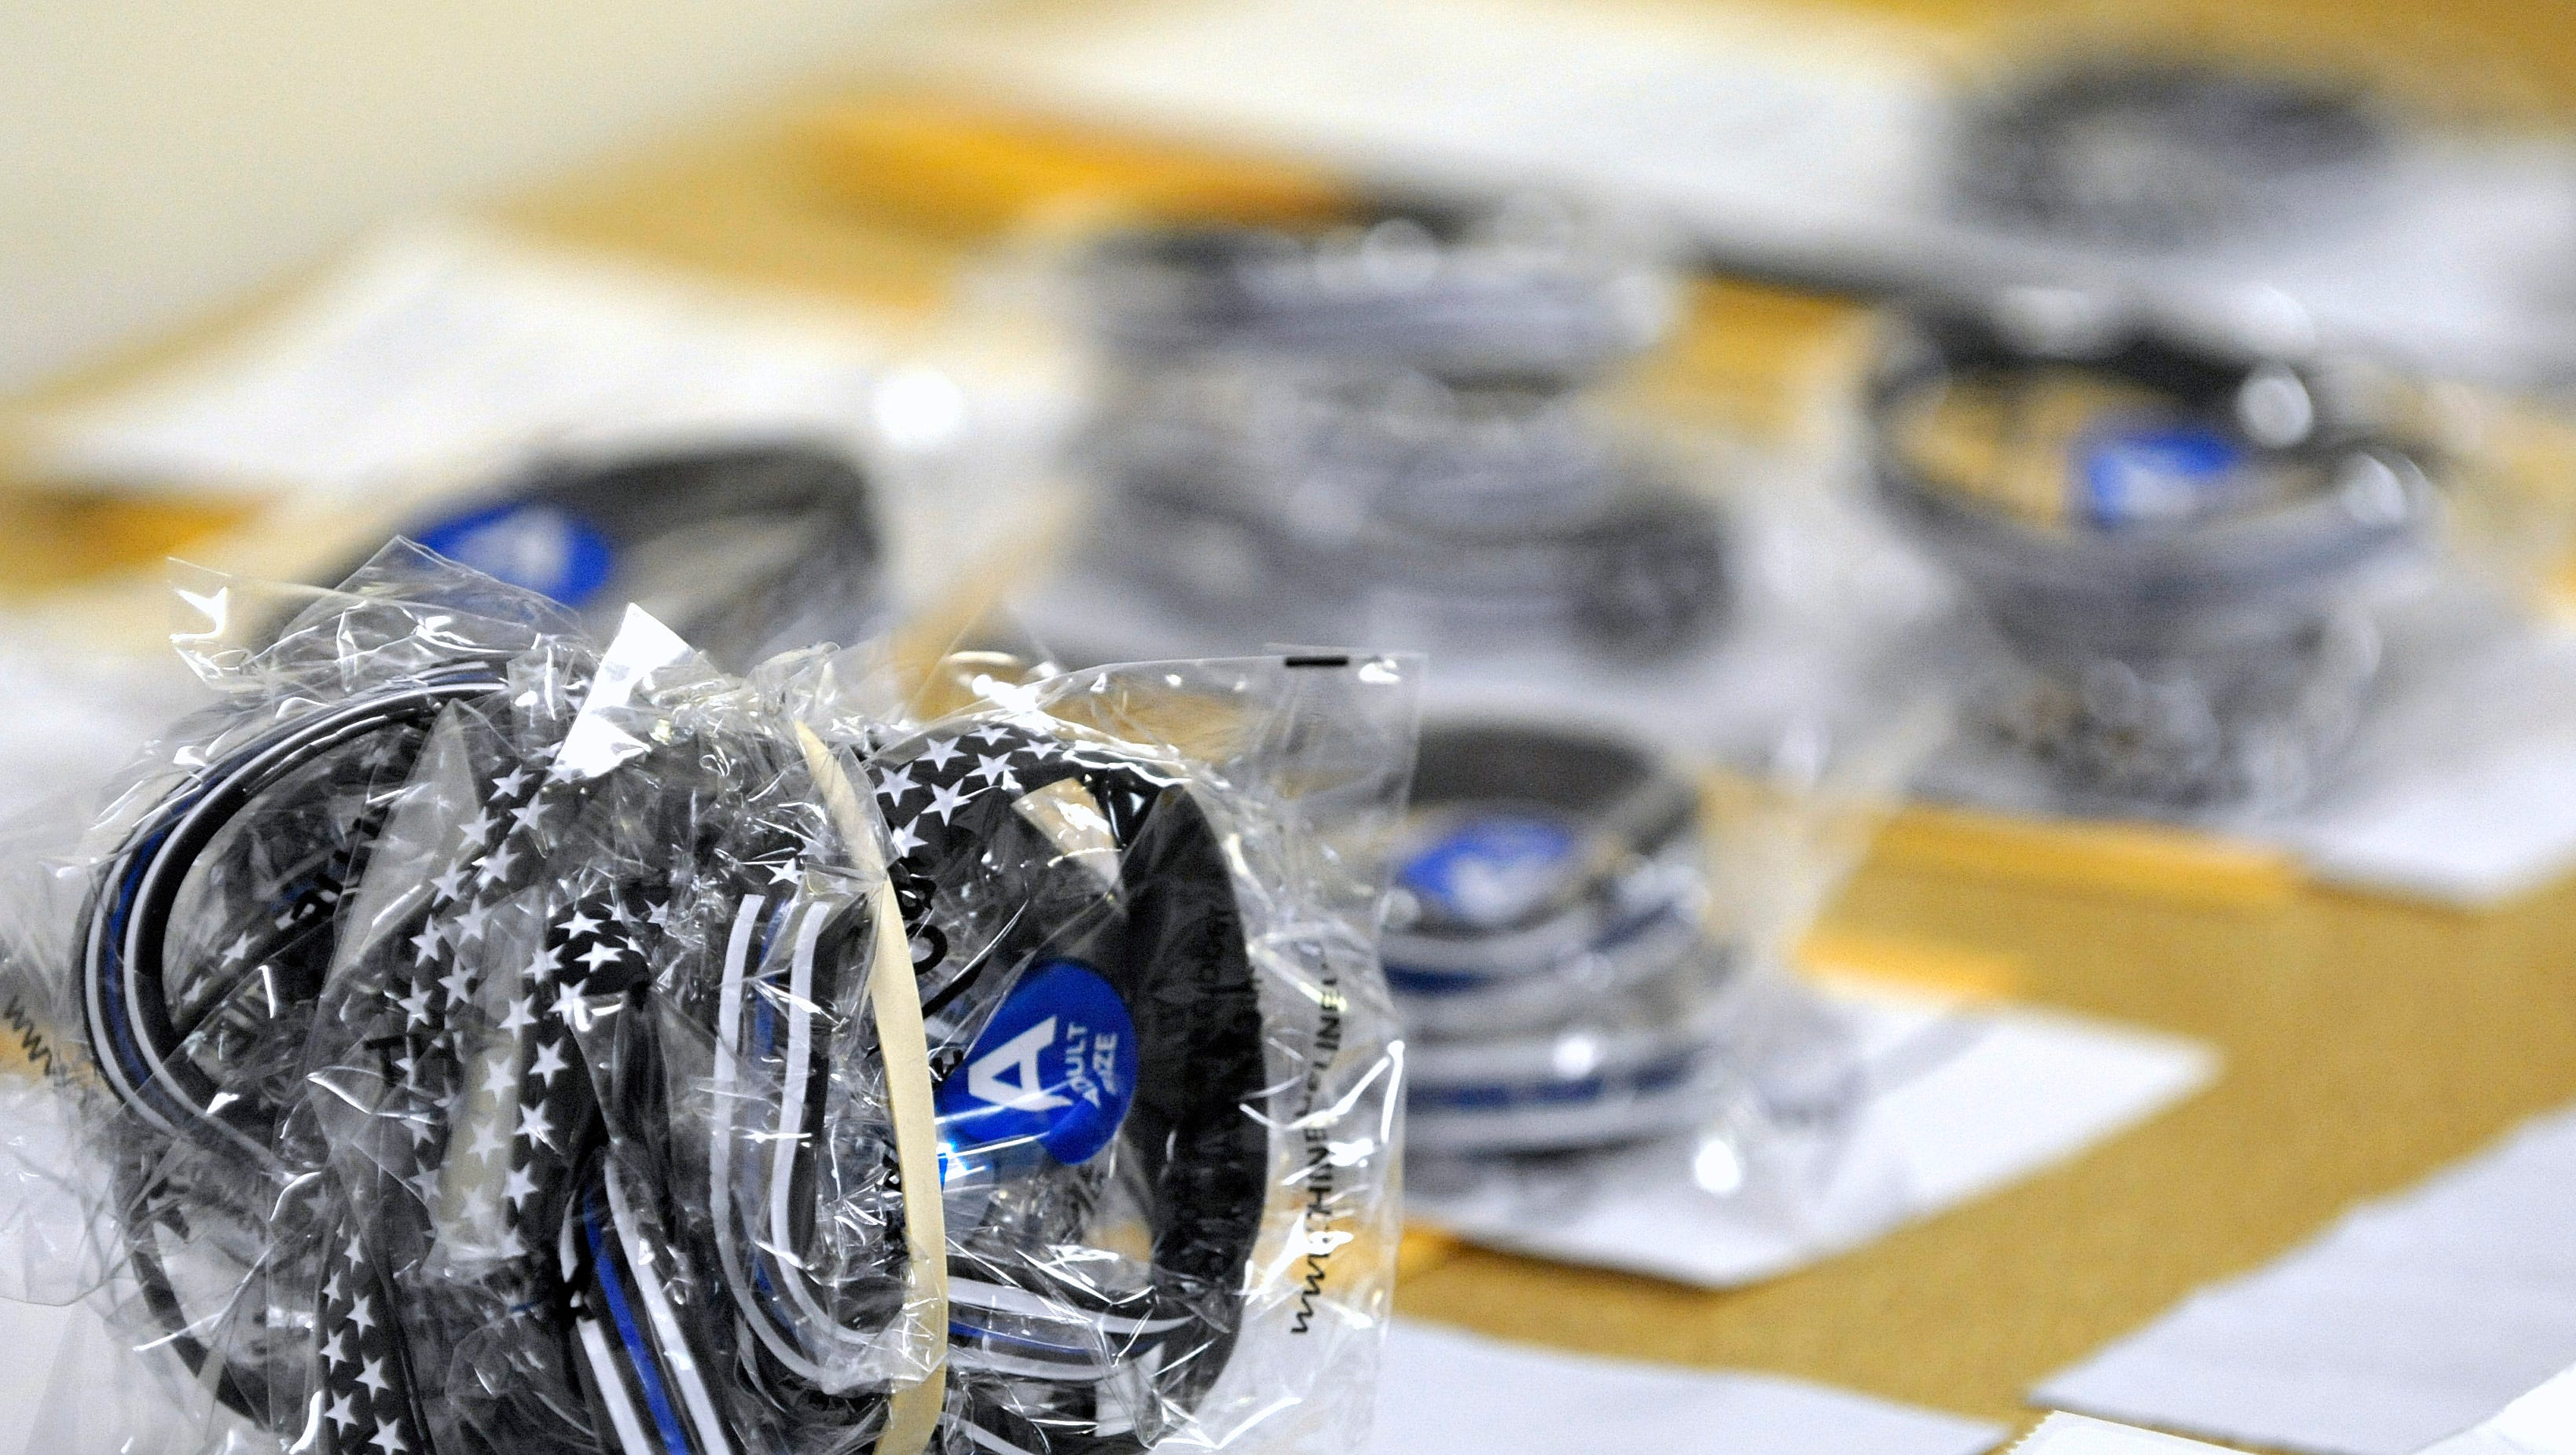 These TBL USA wrist bands, ready to be shipped throughout the U.S., are part of the Give Blue fundraising branch of the company. When a law enforcement officer is killed in the line of duty, the TBL USA donates 100% of the profits from wrist band fundraisers to the families of those fallen officers.